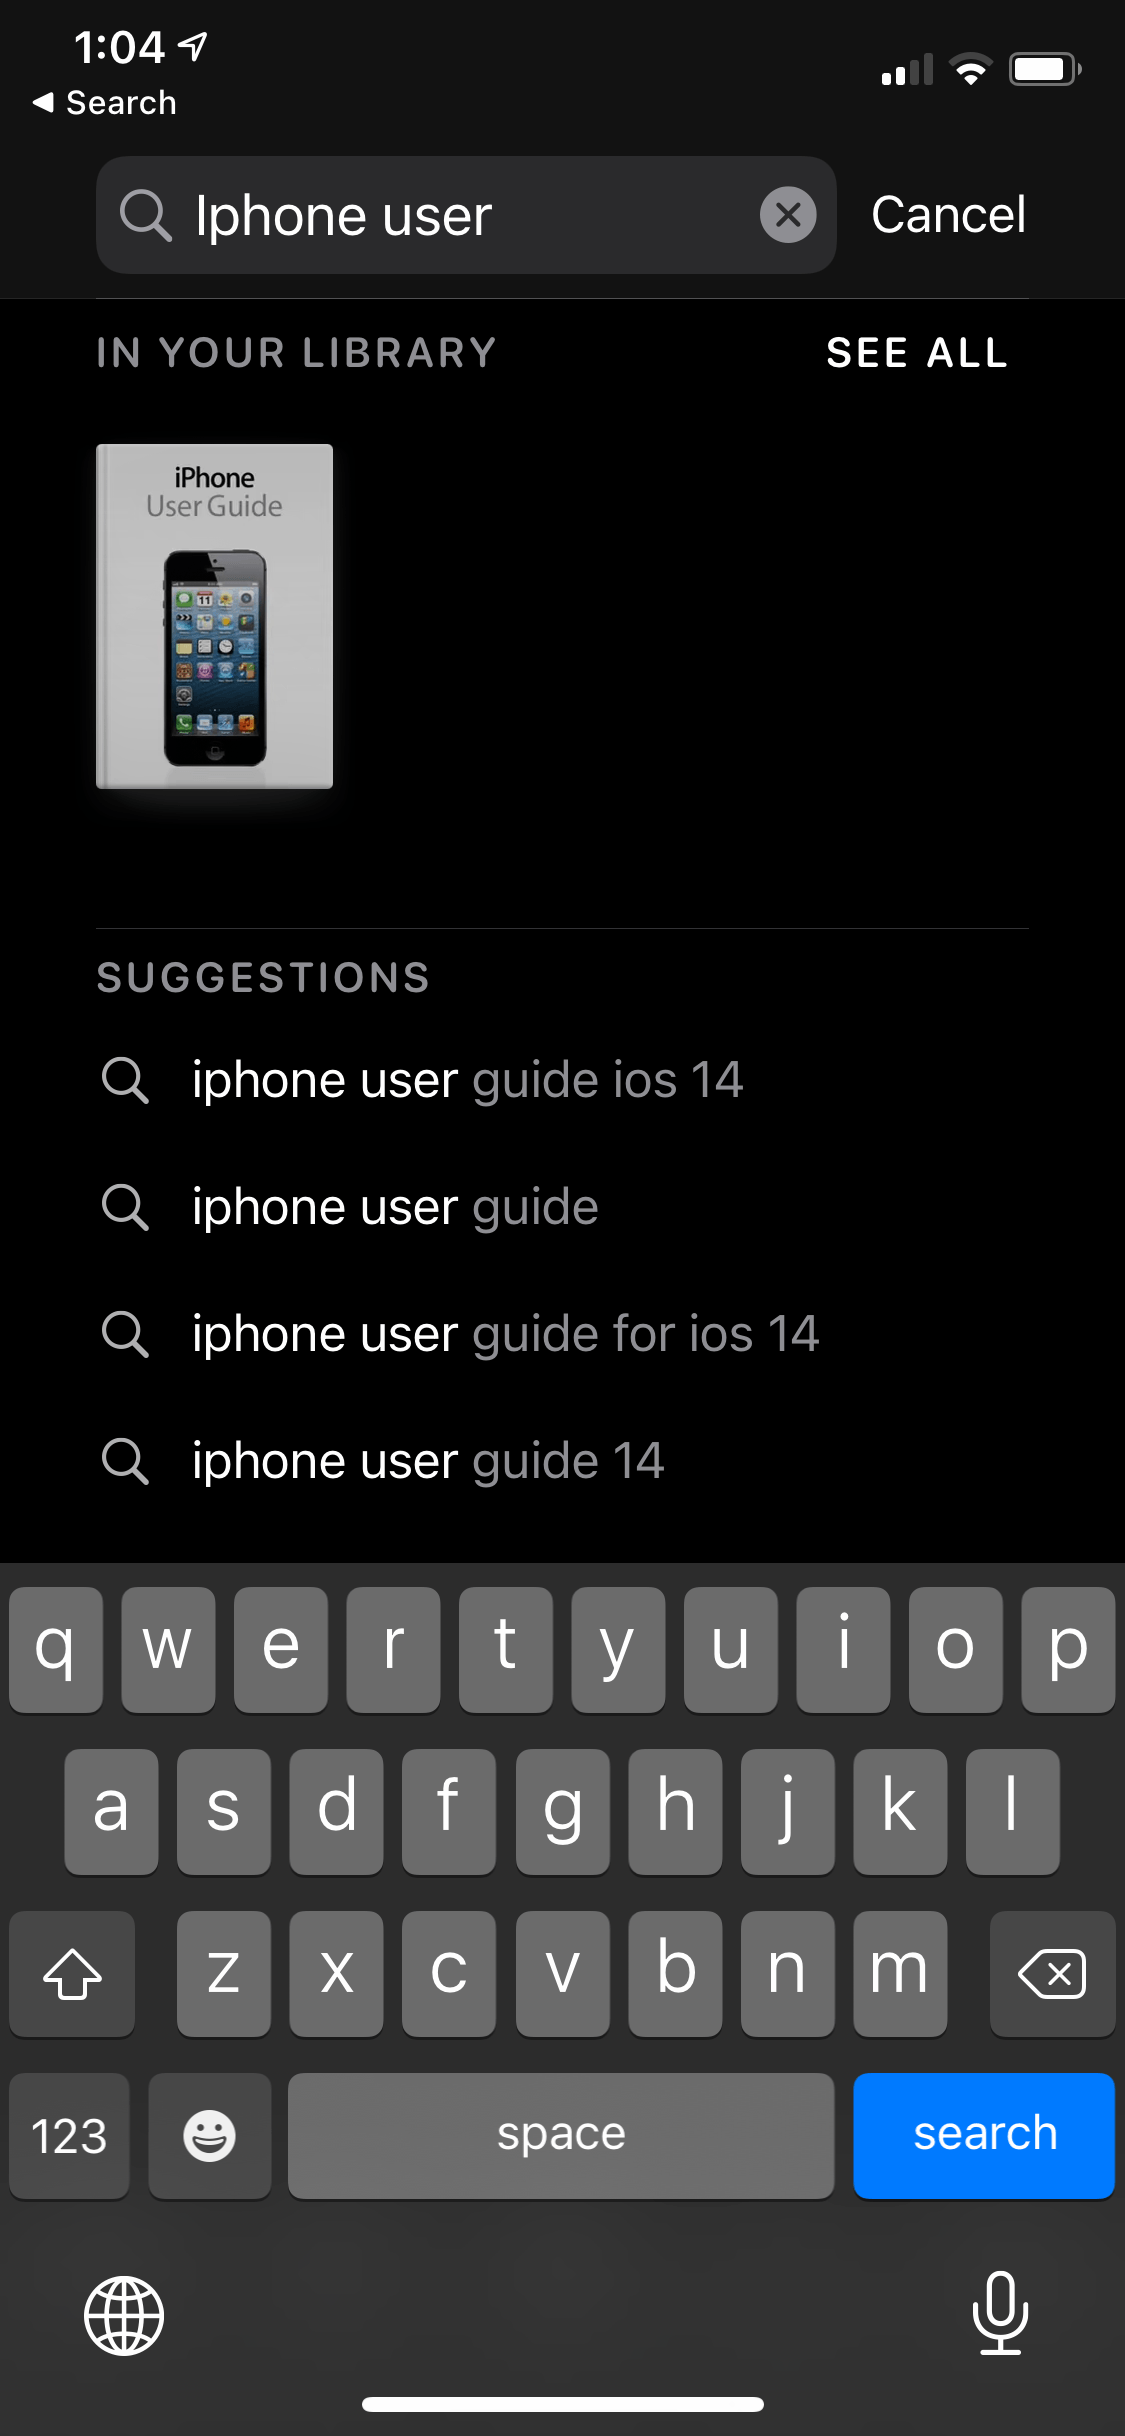 searching for iphone user guide in ibooks app on iphone